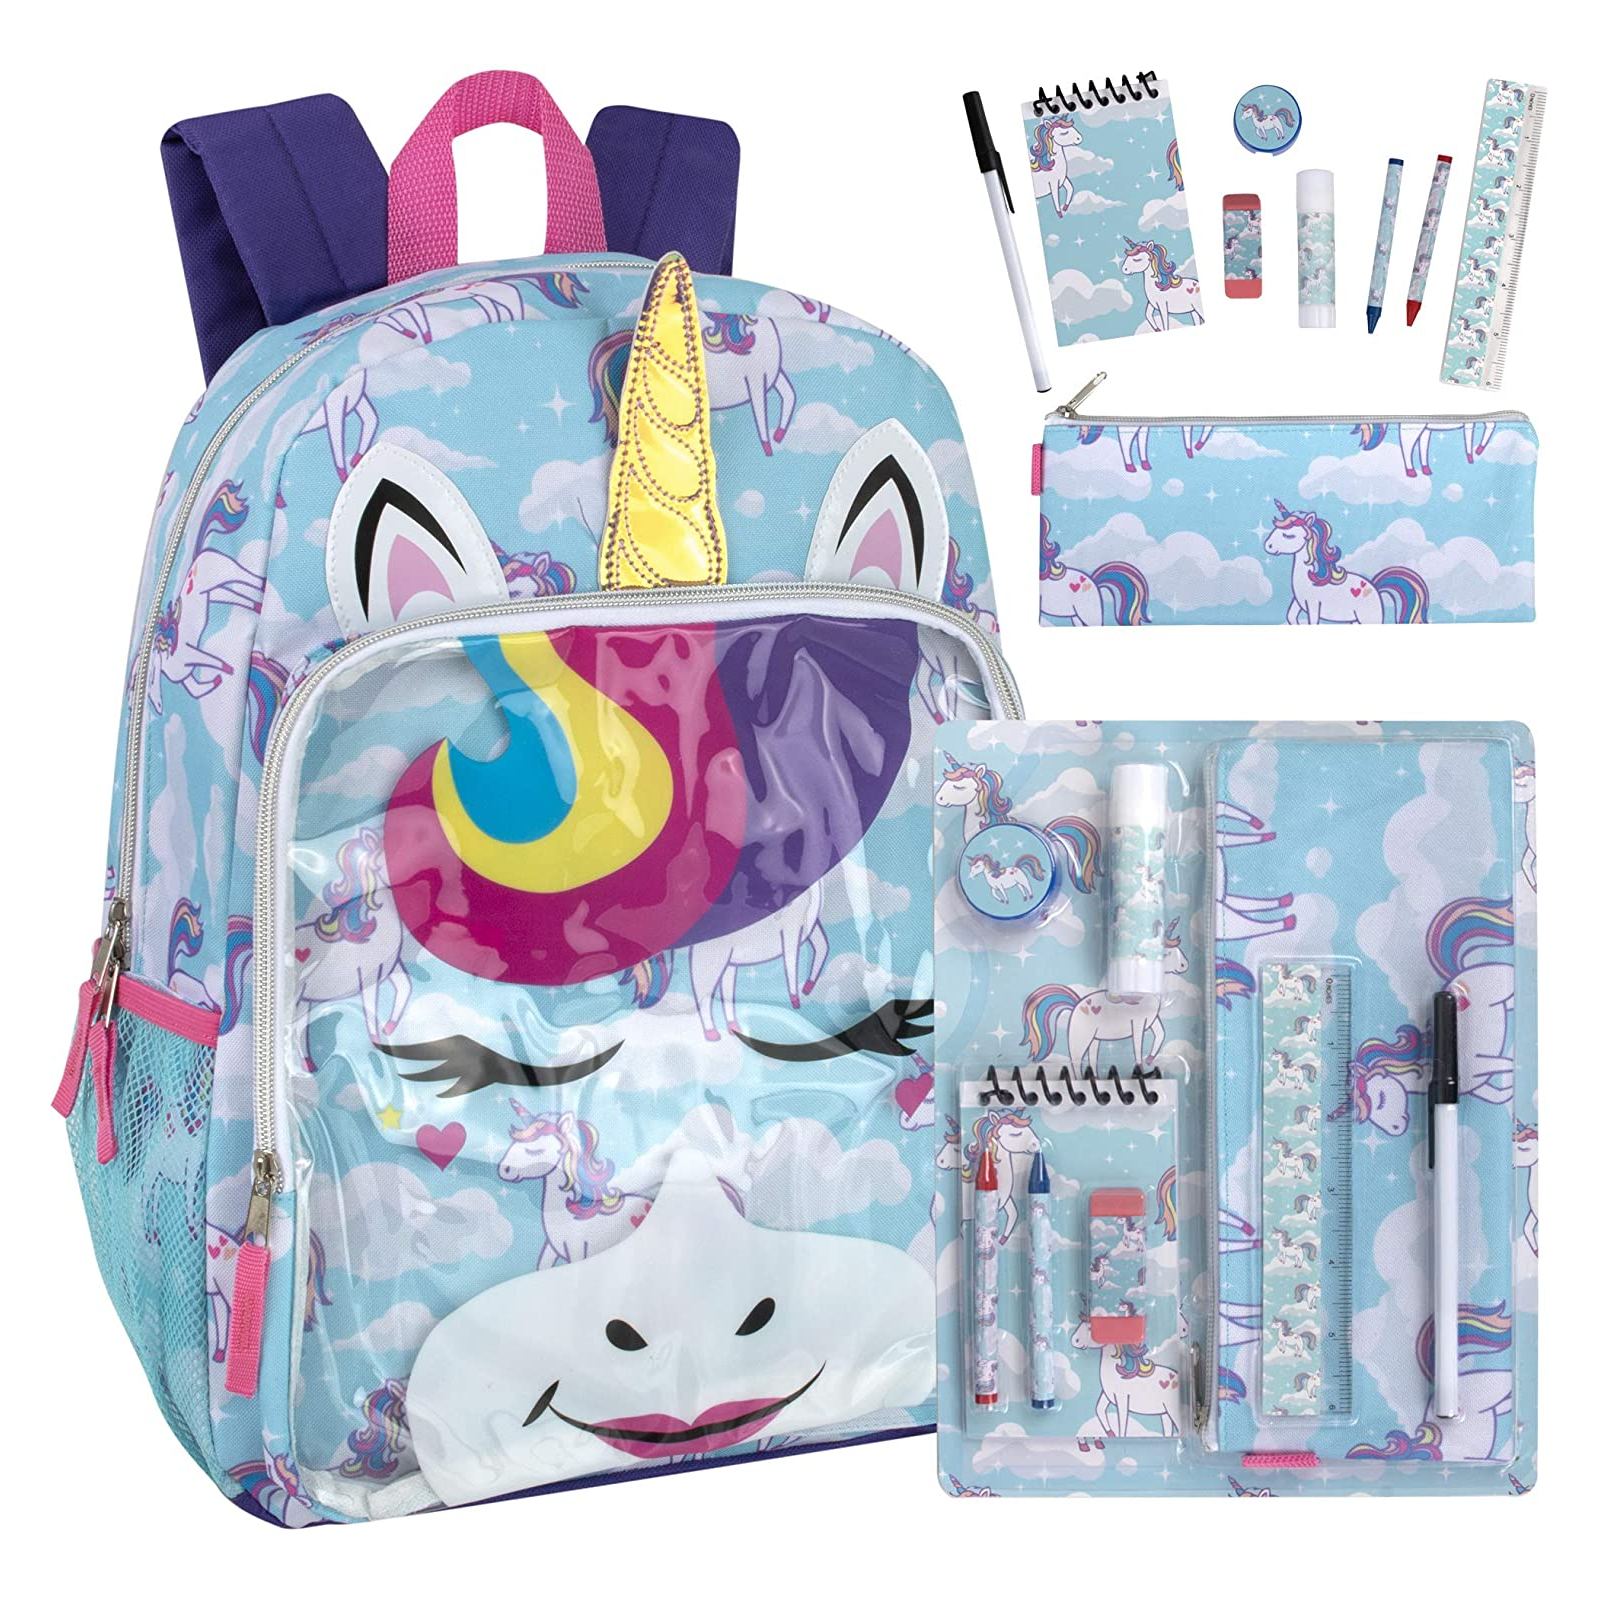 Trail Maker Girls Unicorn Backpack Front View